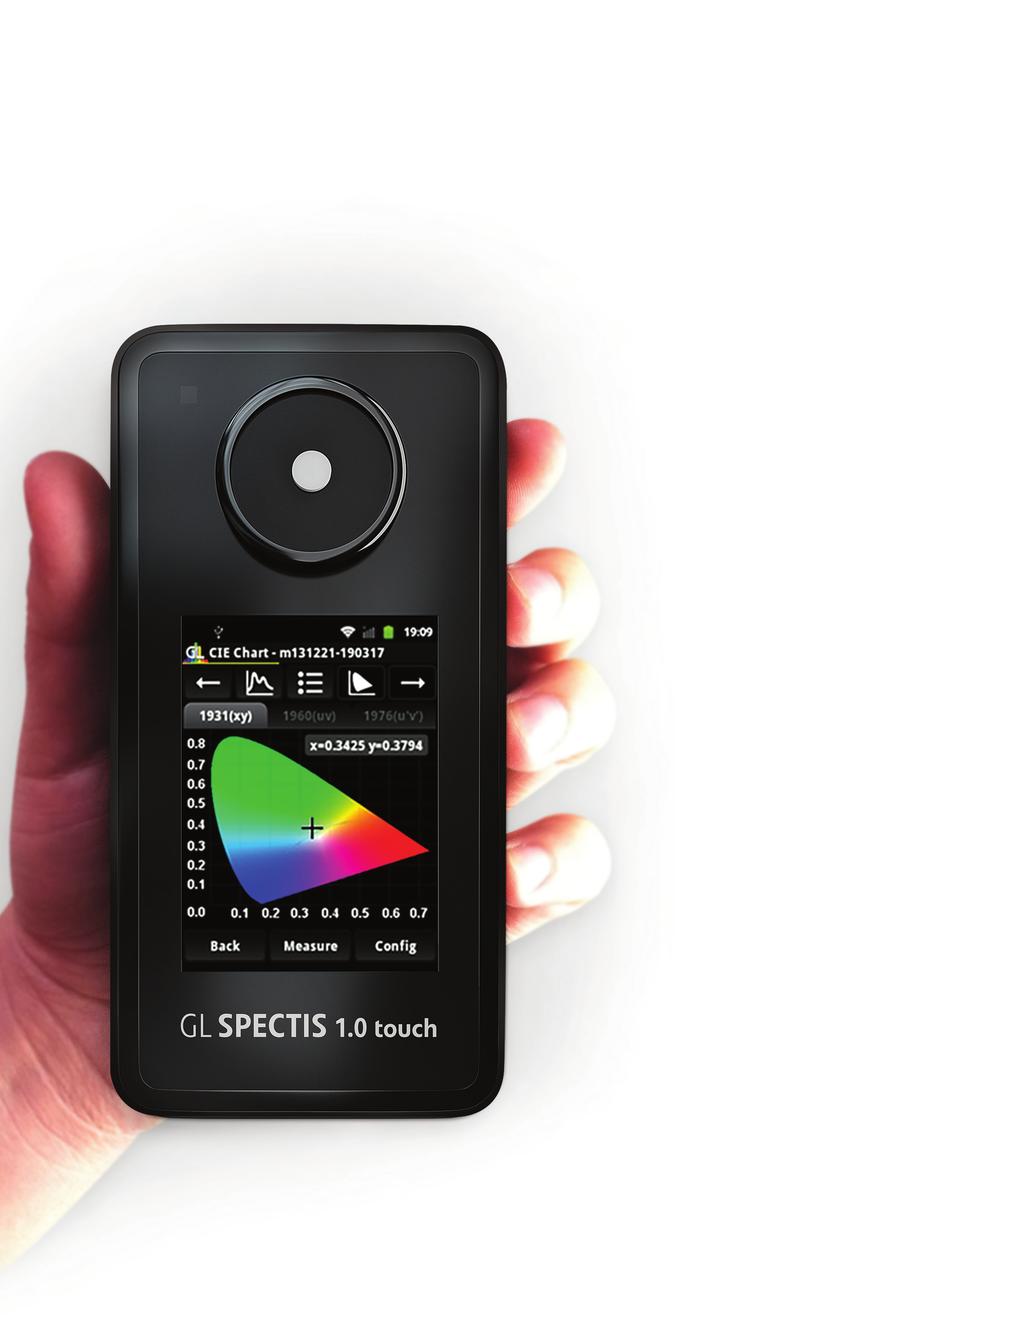 TM Touch the technology GL spectis 1.0 Touch The world s first smart spectrometer.